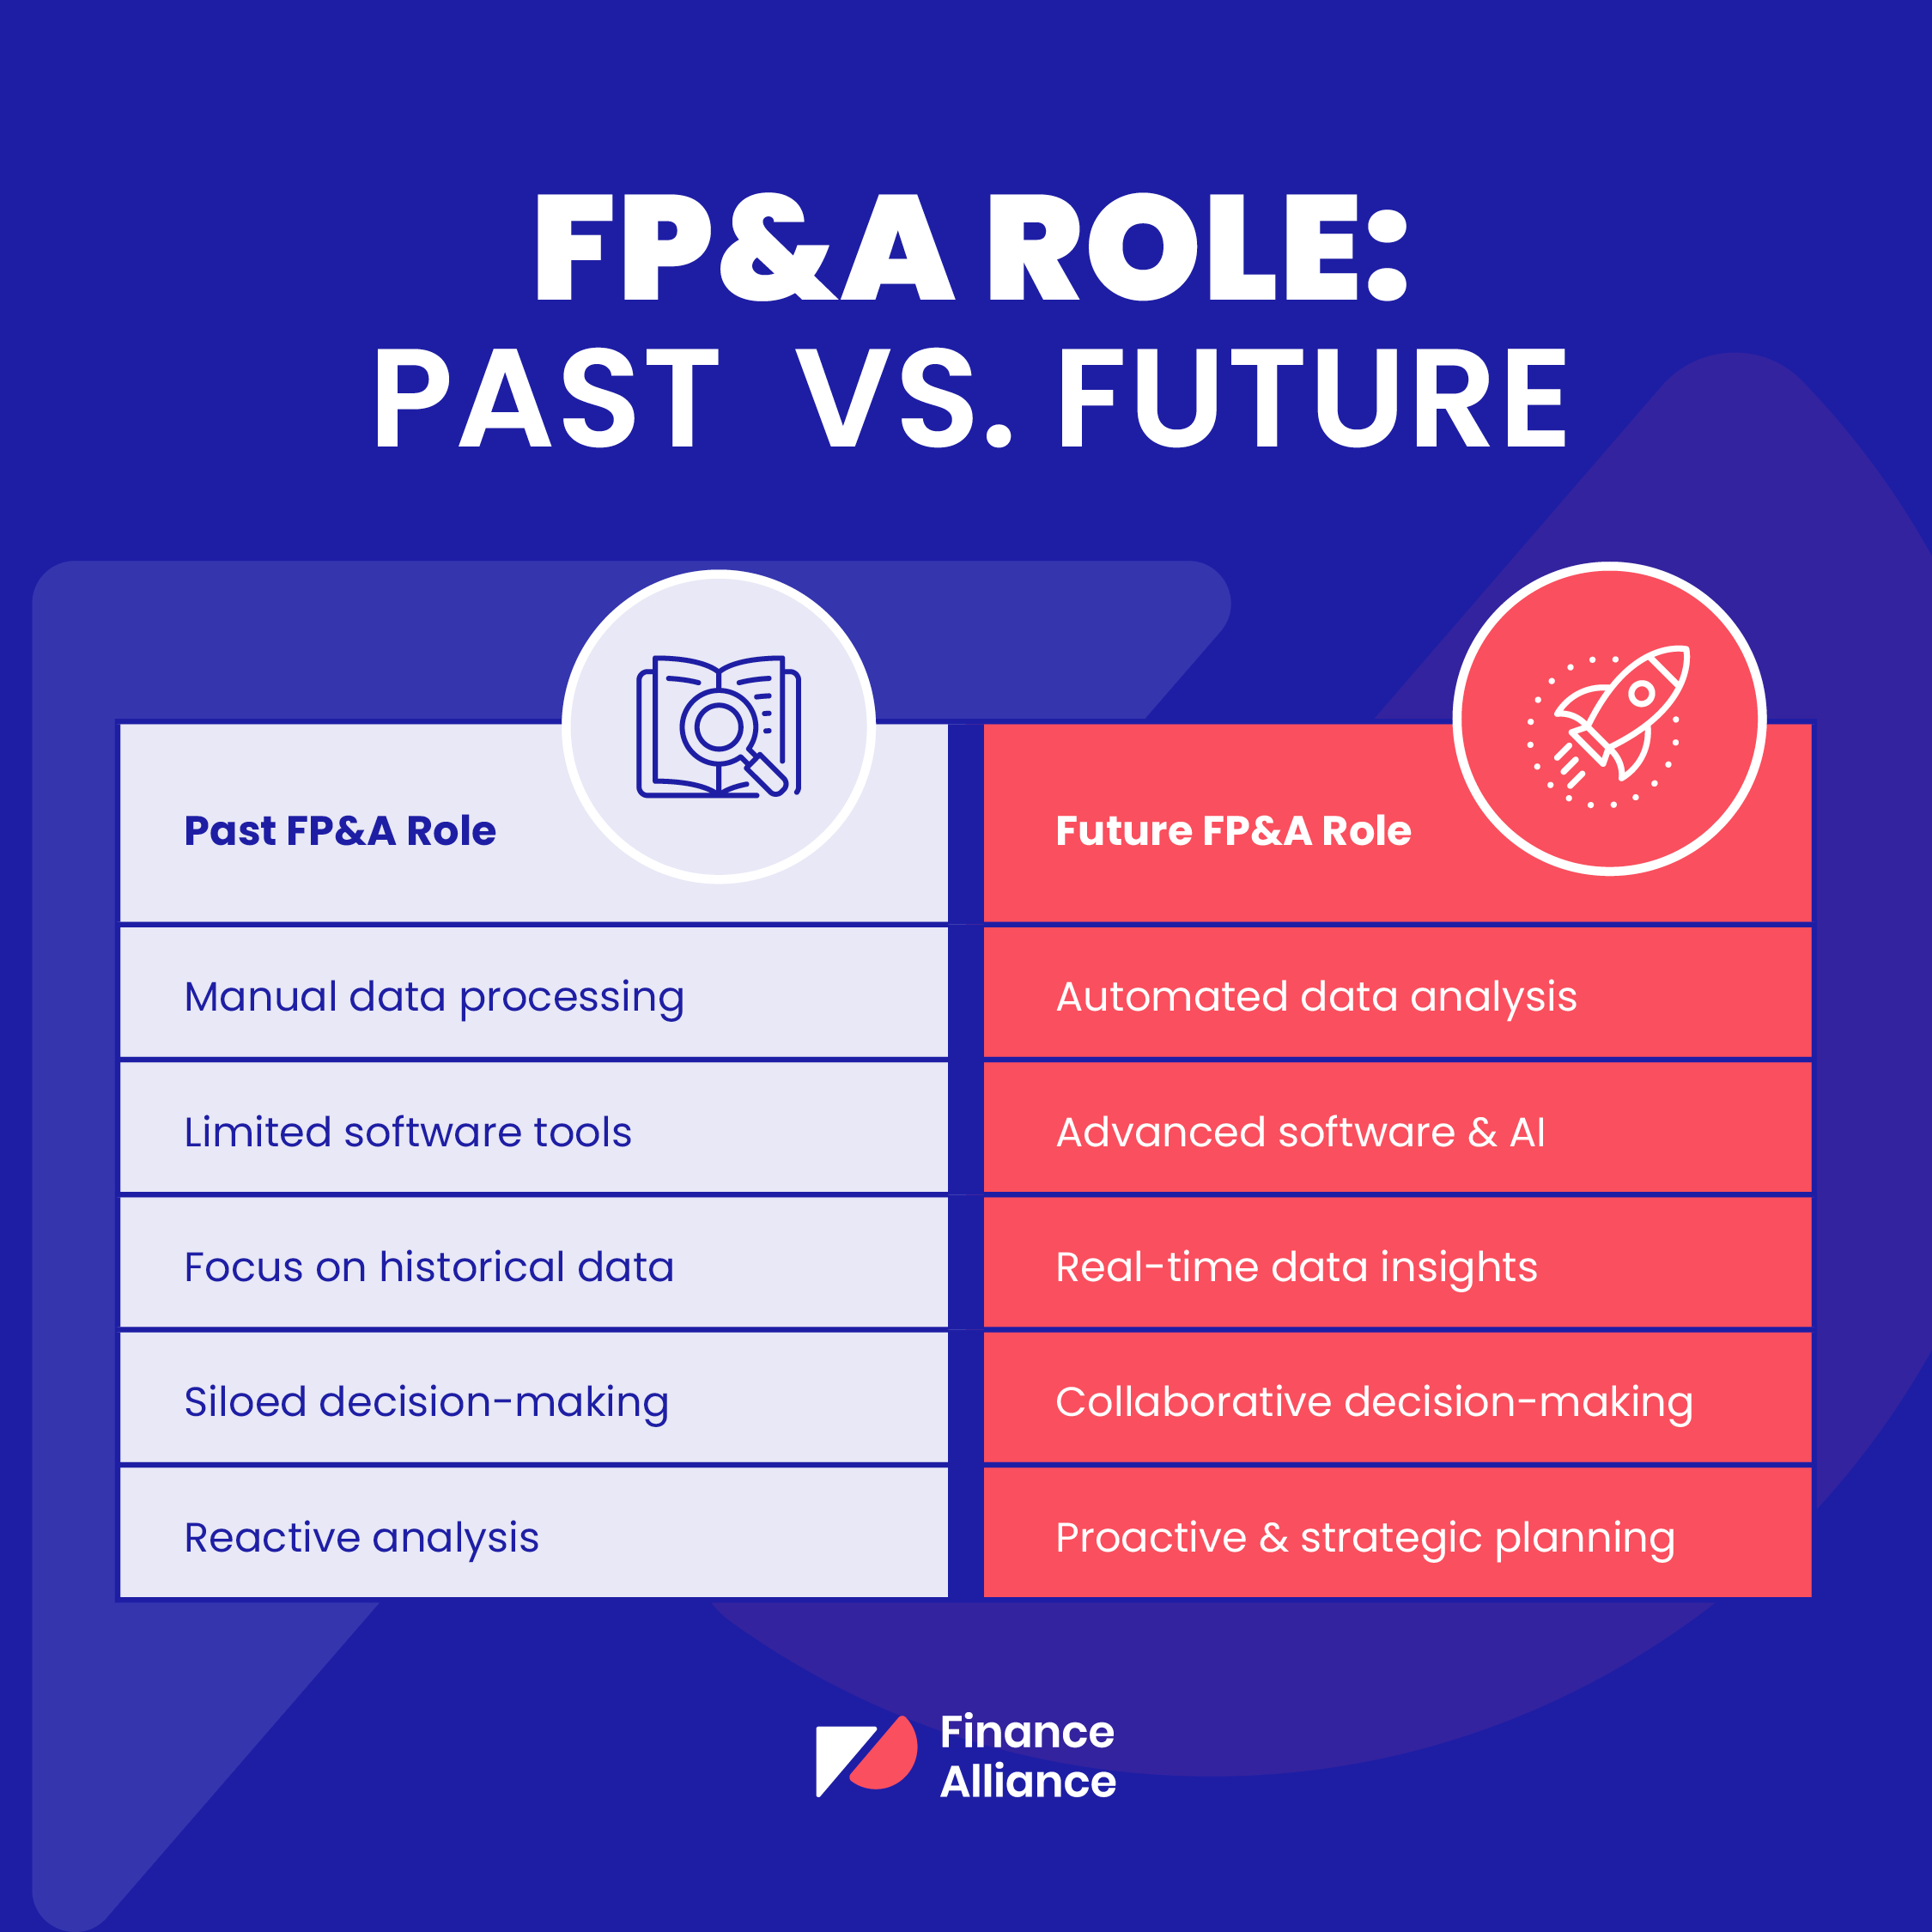 Future of FP&A - Past vs Future of the FP&A role